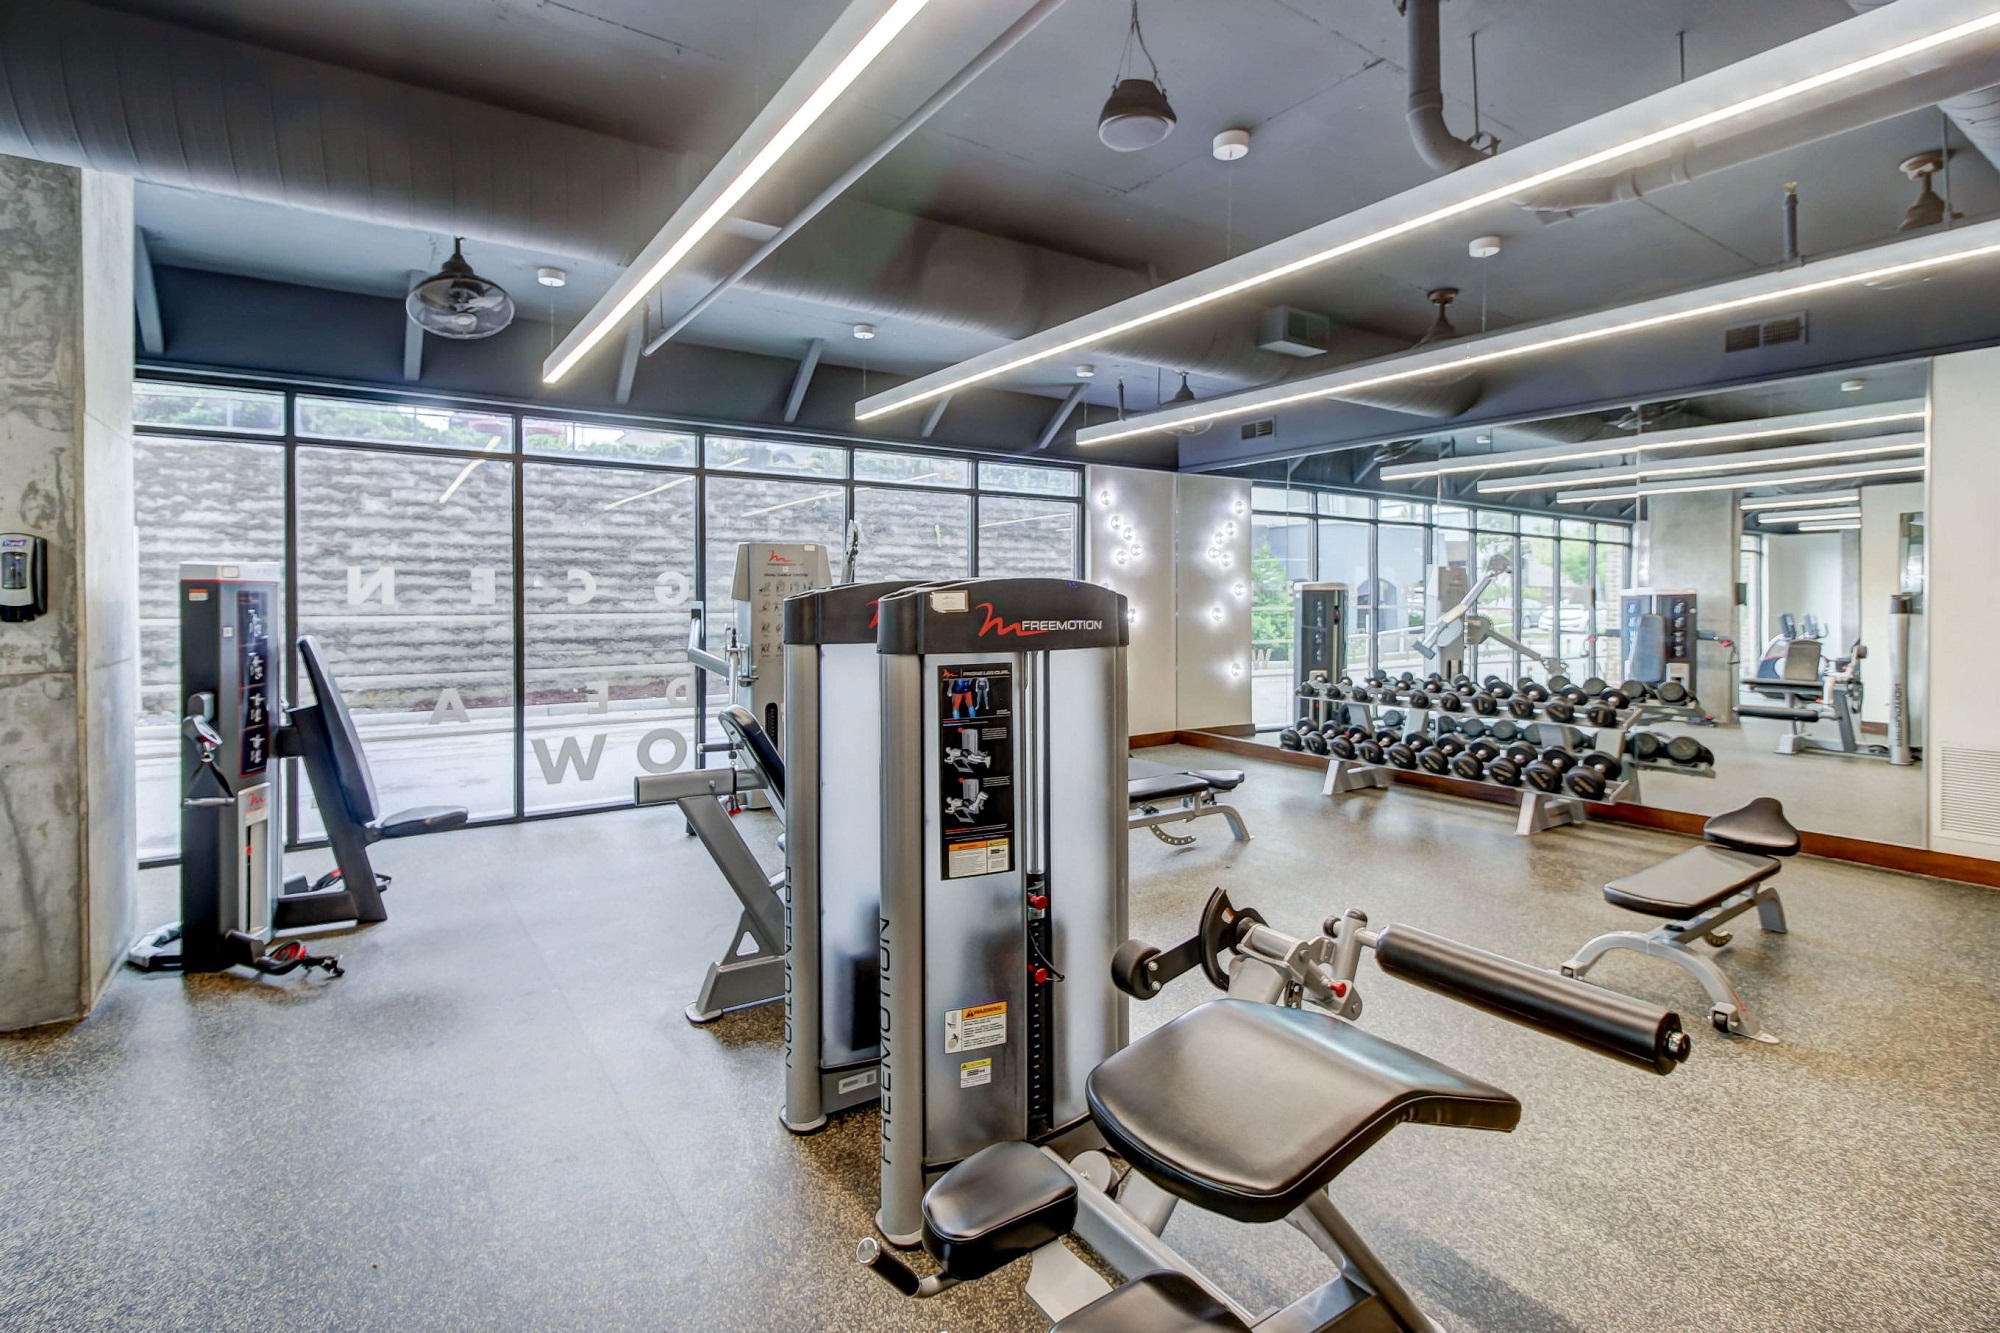 Fitness center with various weight machines, benches, free weights, large mirror wall, and floor to ceiling exterior windows